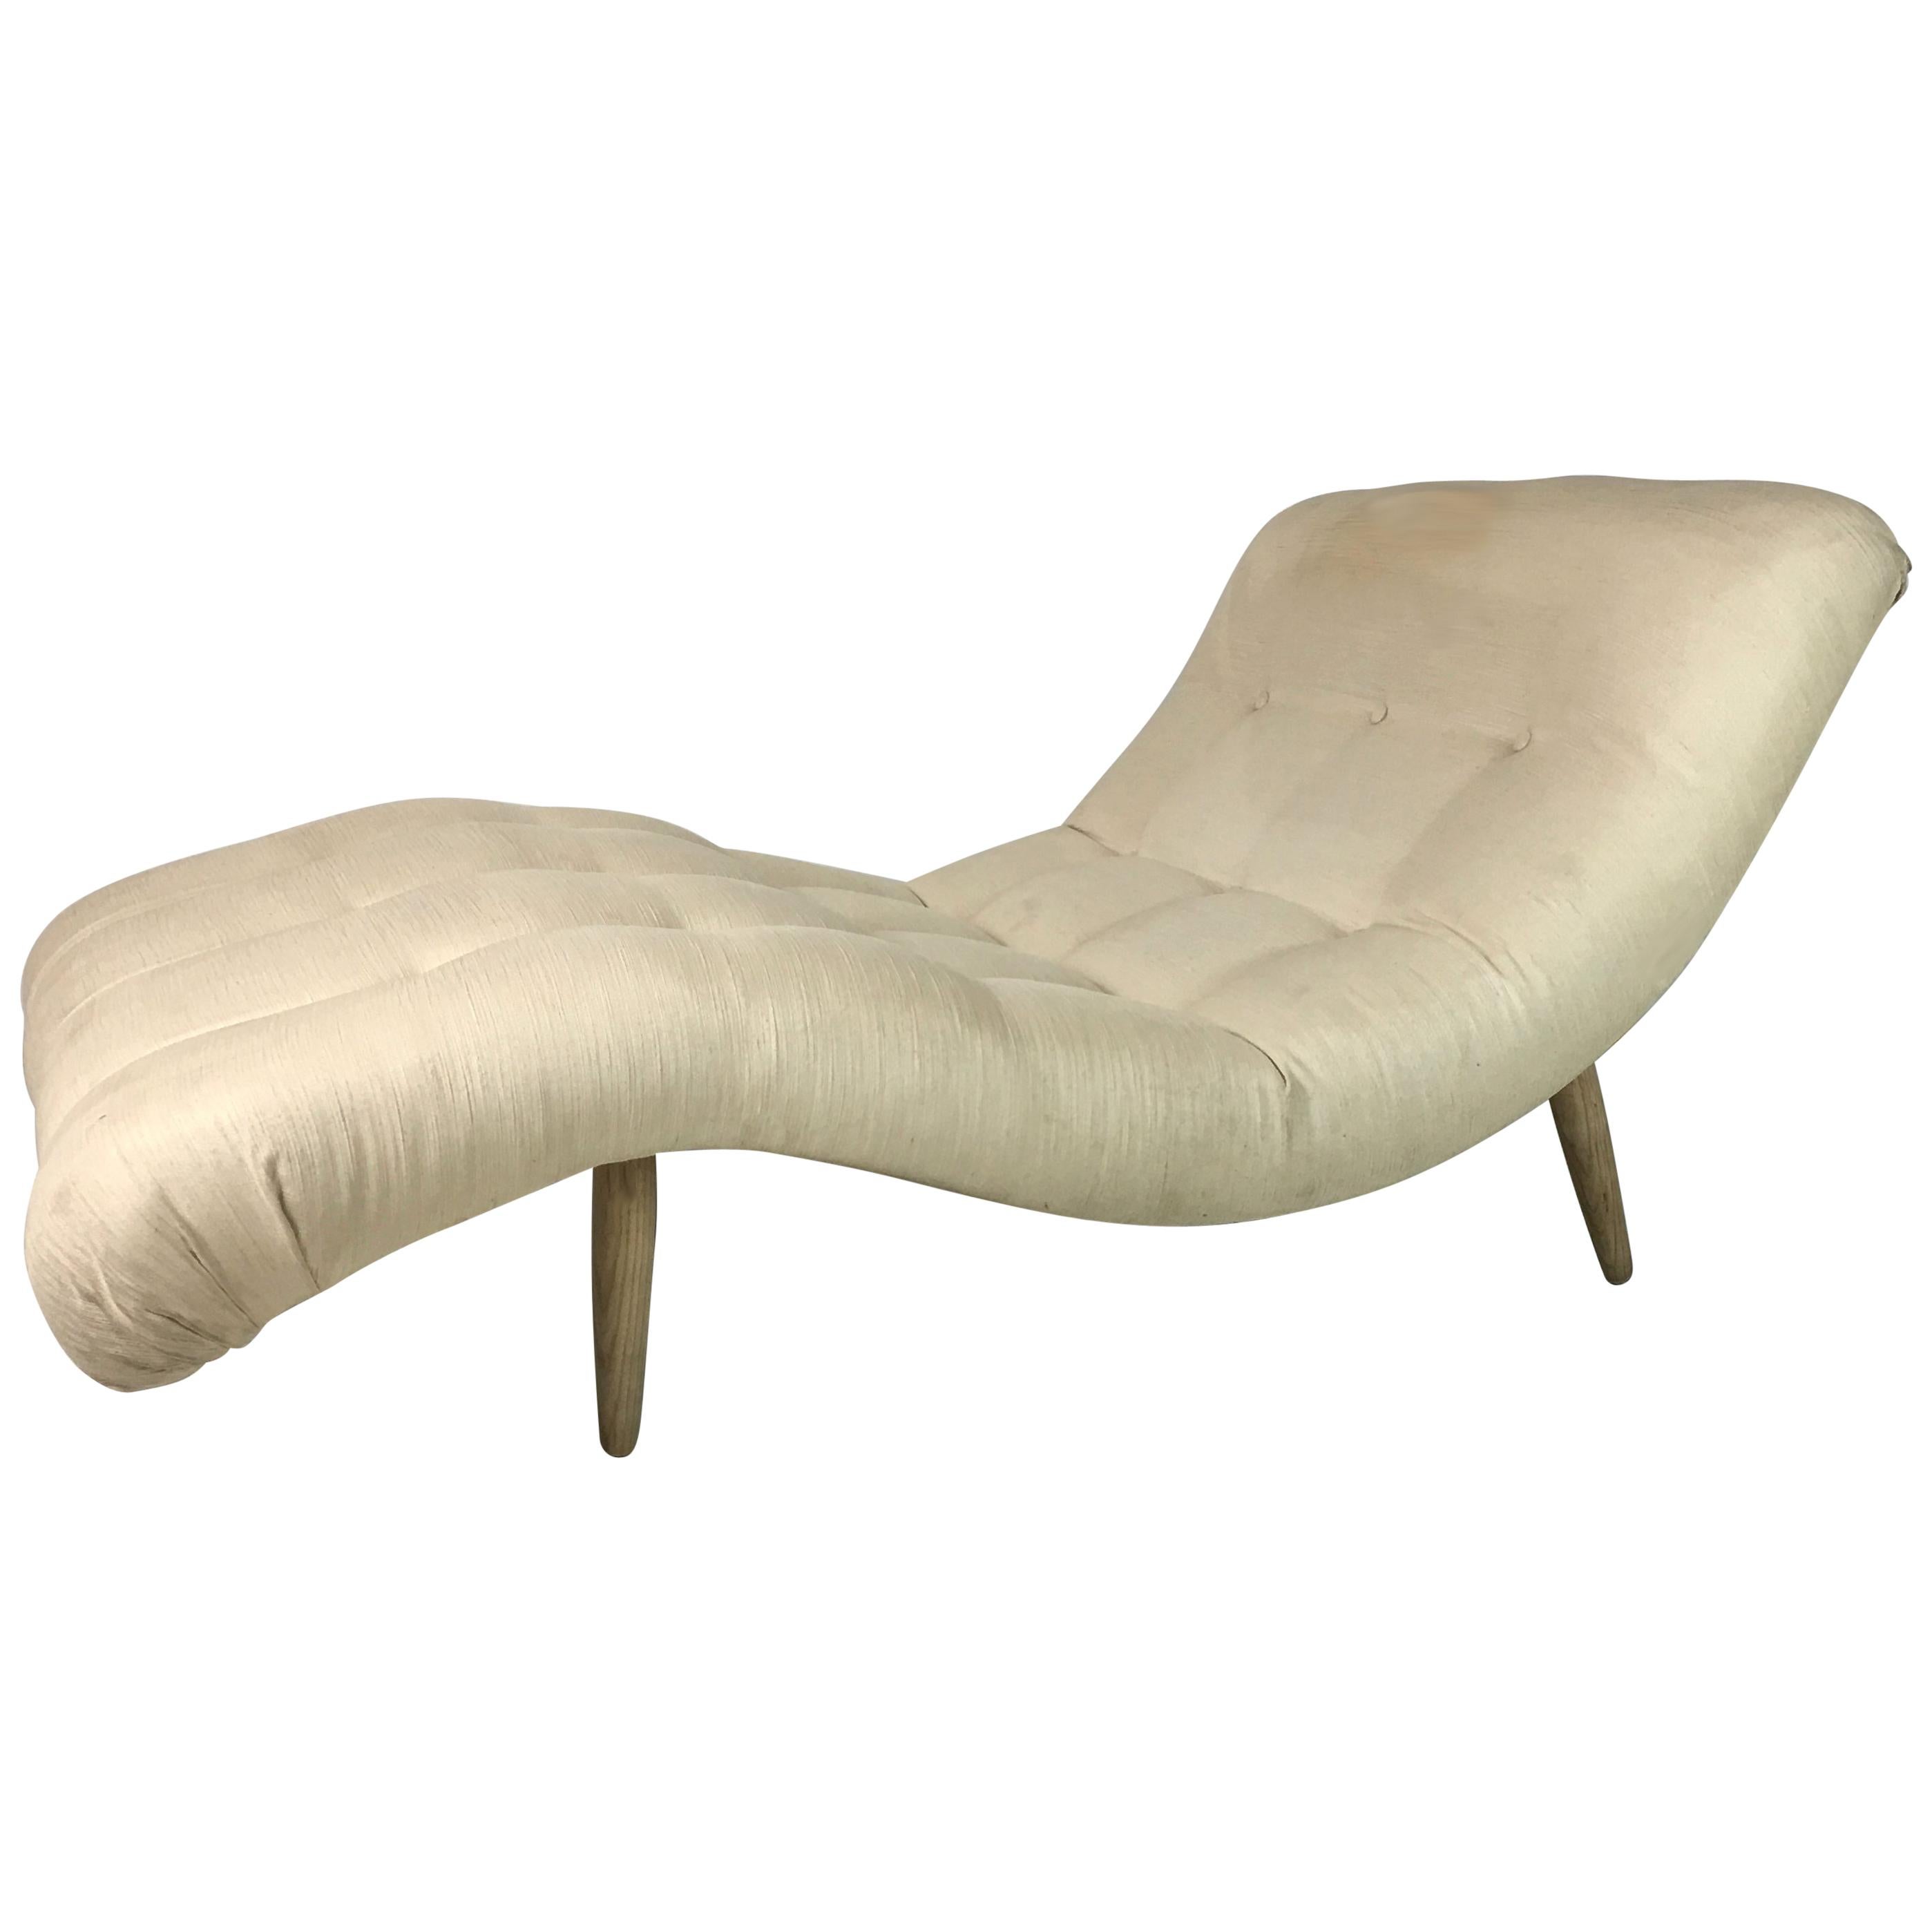 Contour Chaise Longue by Adrian Pearsall for Craft Associates